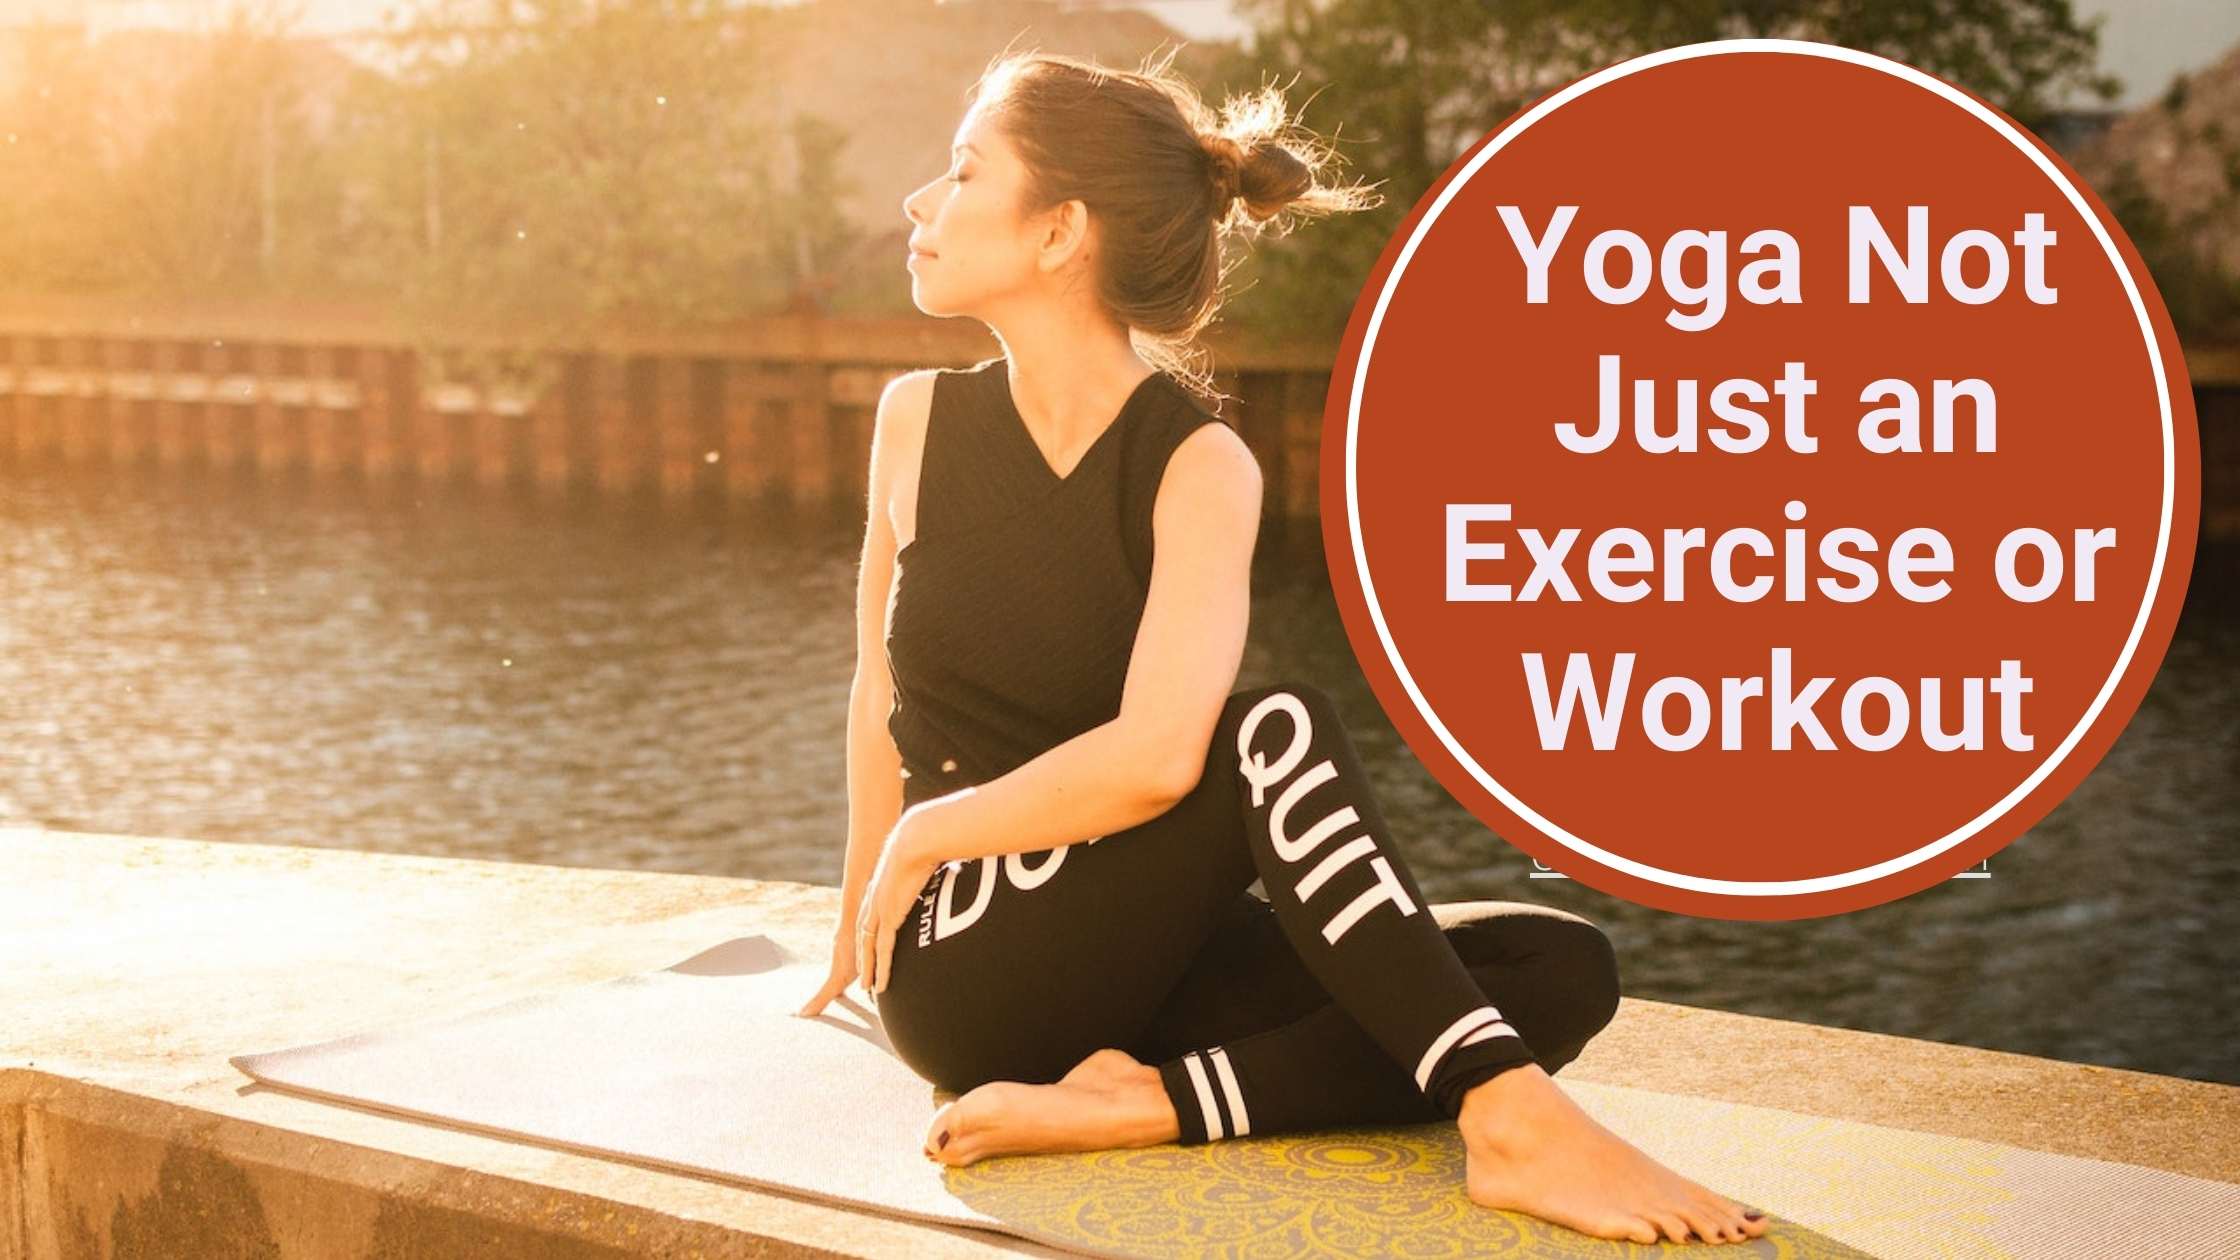 Yoga Not Just an Exercise or Workout